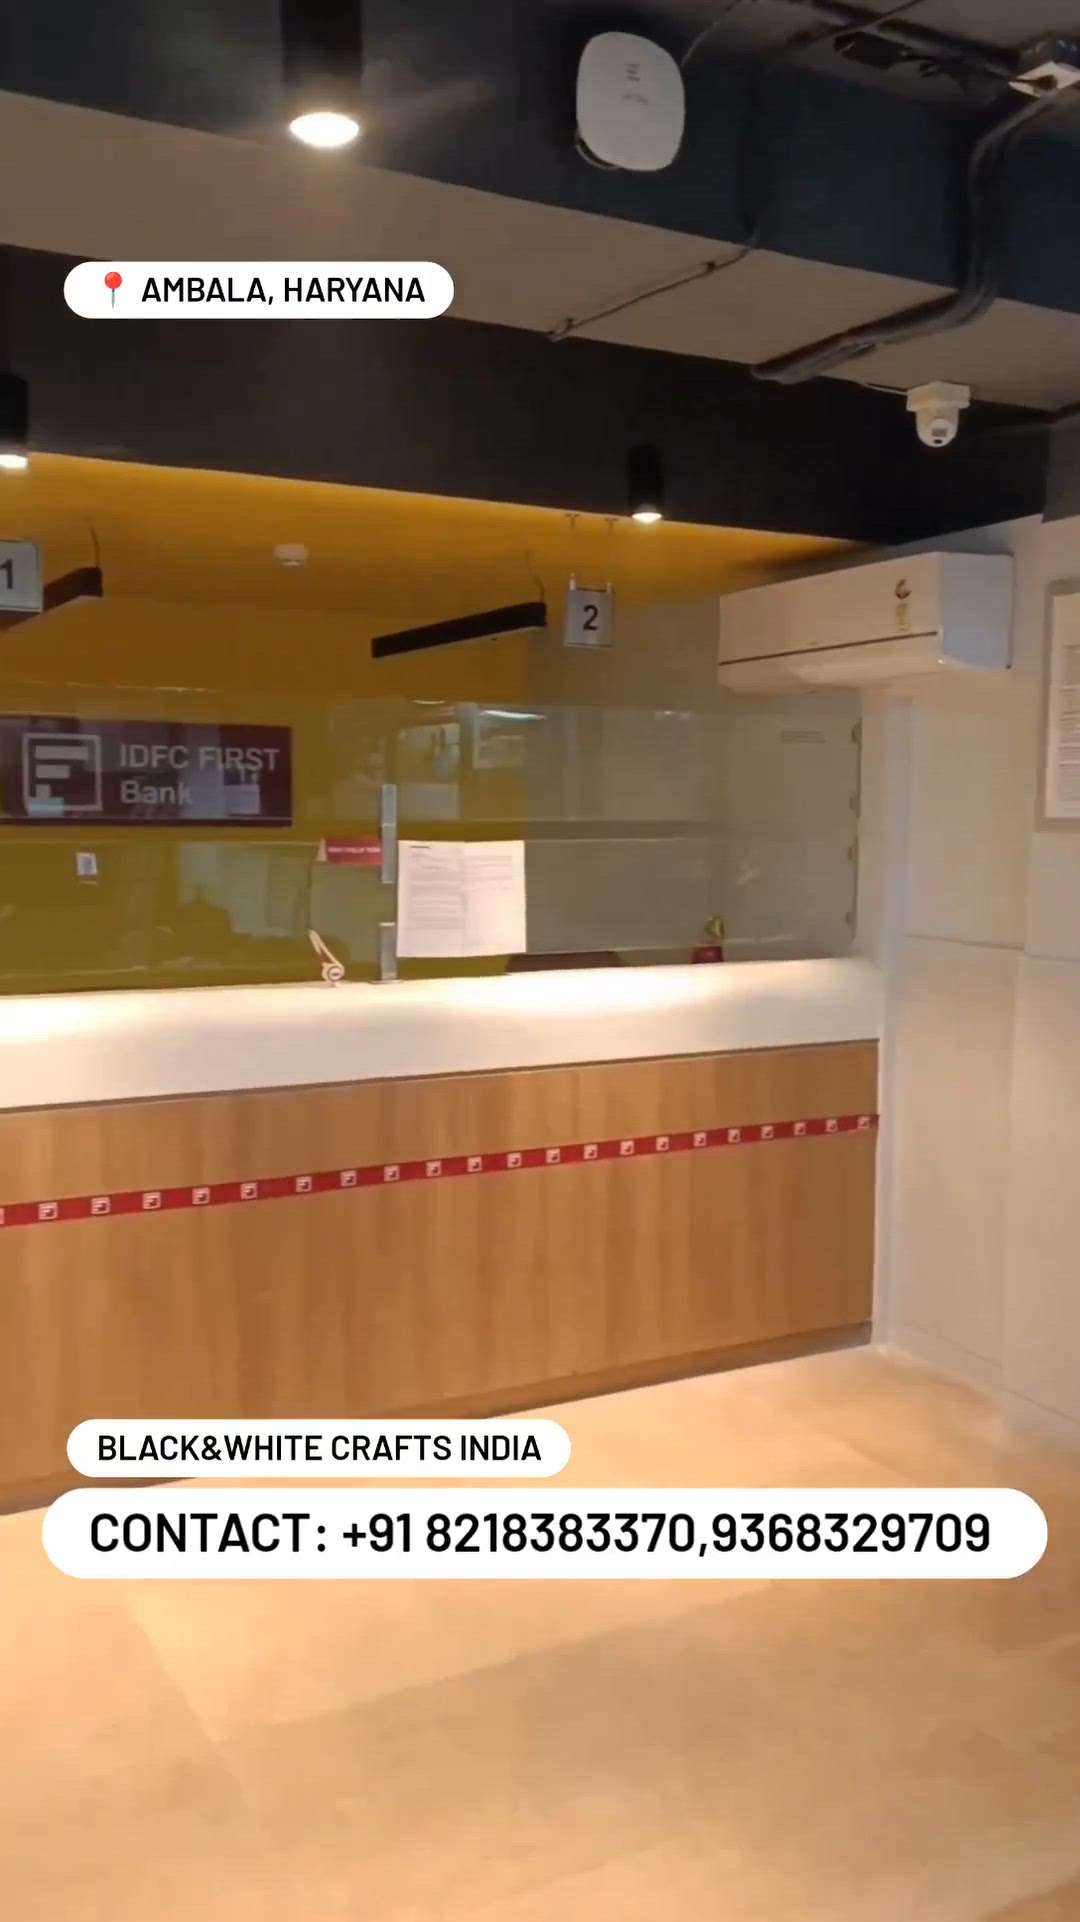 Black&White Crafts India
📍IDFC Bank, Branch Ambala (HR)
#interior #interiorsite #interiorexecution #interiordesign
.
.
.
well-designed Home, Office and Showrooms are not just about convenience or practicality, but also about style and personality.
At B&W, We understand the value and the worth of our clients, hence we provide them with state-of-the-art designs to execute that are both functional and luxurious at the same time.
.
.
.
Contact (WhatsApp): (+91) 9368329709, 8218383370
Follow us for more: @bnwcrafts 
#home #homedecor #decor #interior #interiordesigner #modular #showroom #office #interiorexecution #handicrafts #handicraftsofindia #wood #steel #horn #bone #leather #bnwcrafts #interiorsite #delhi #noida #gurgaon #mumbai #pune #jaipur